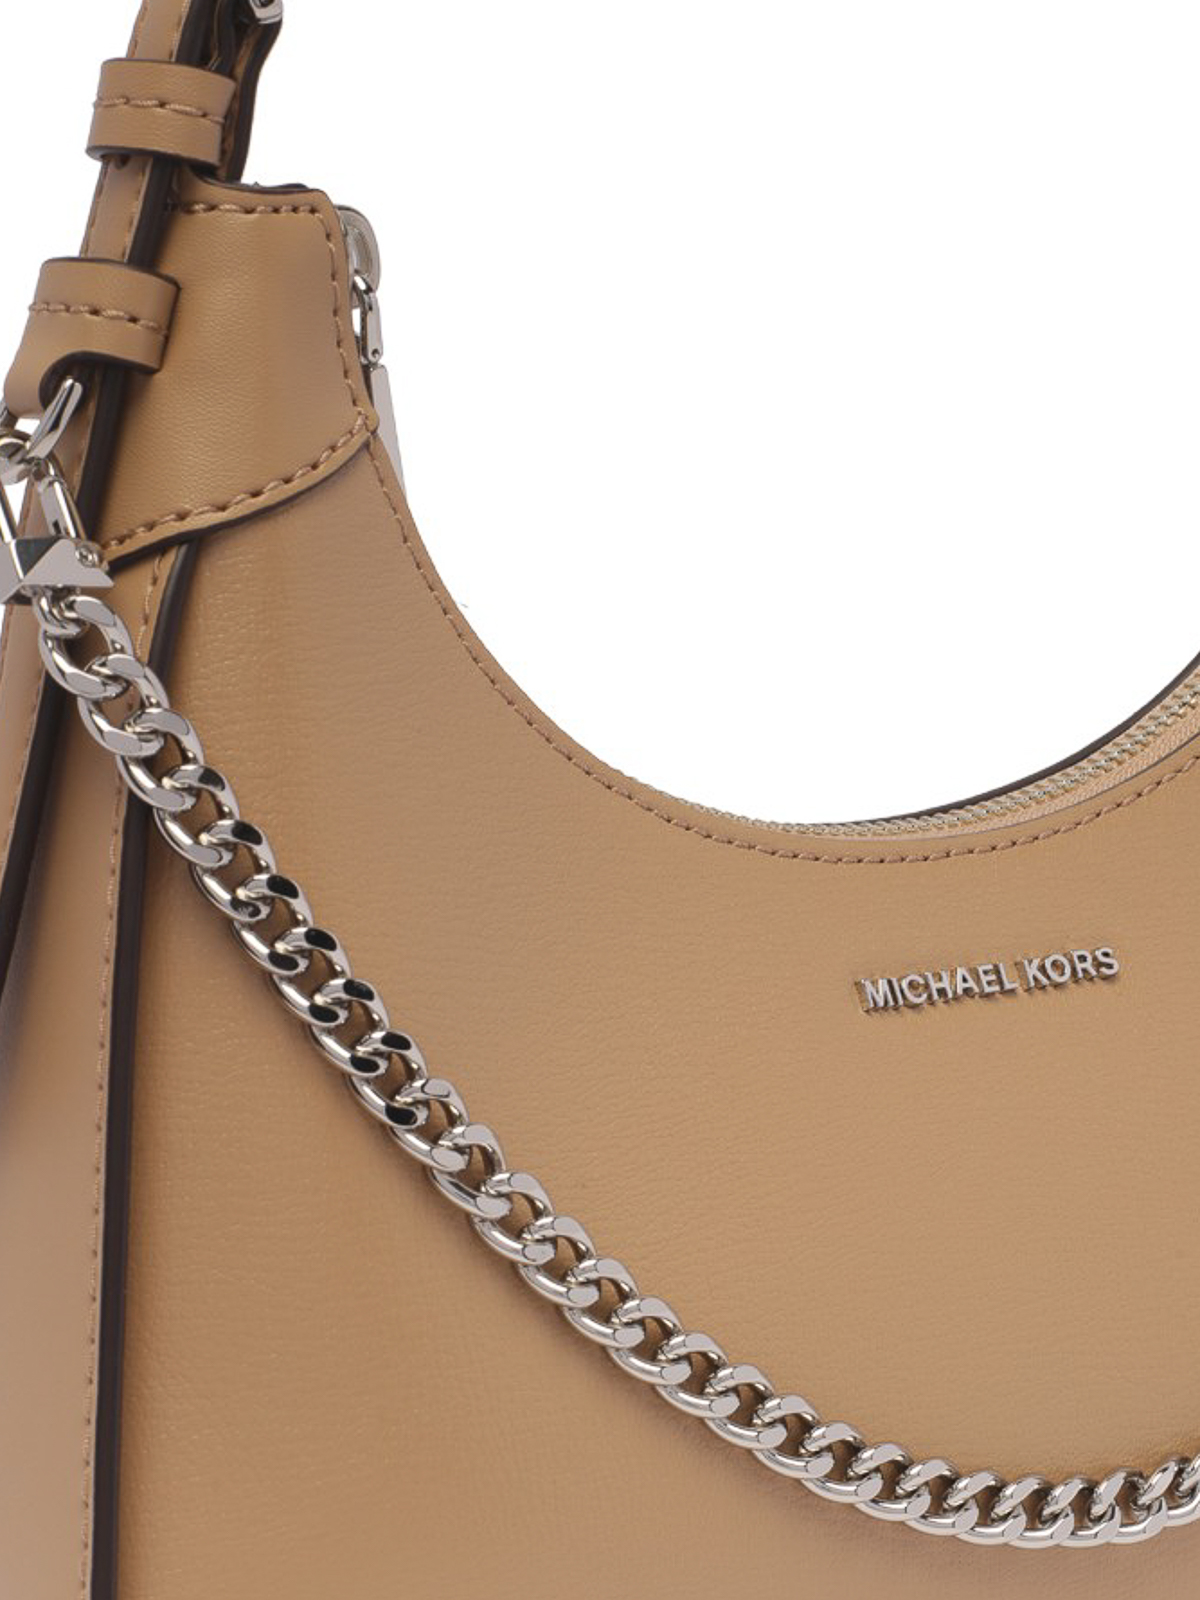 Shoulder bags Michael Kors - Leather Wilma bag with front logo and strap -  32R3S3WN6L222